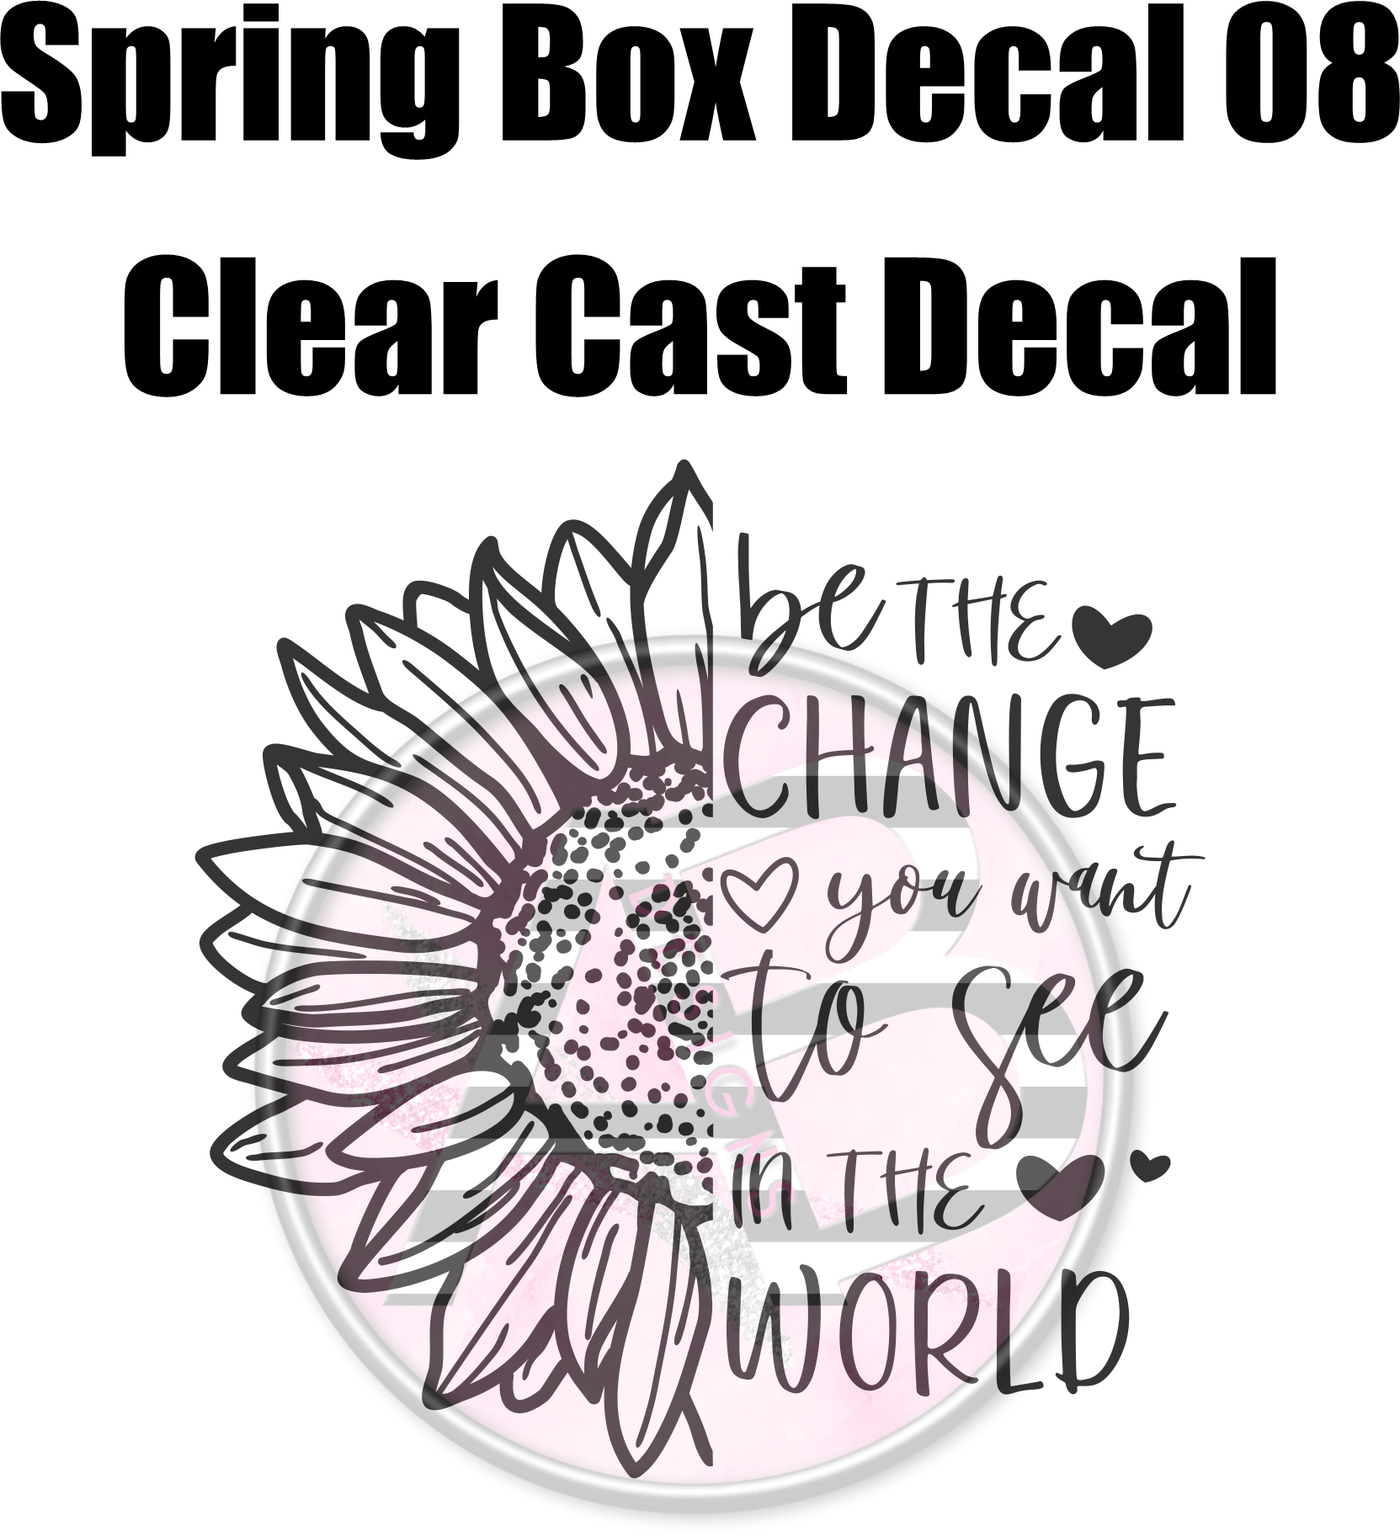 Spring Box Decal 08 - Clear Cast Decal